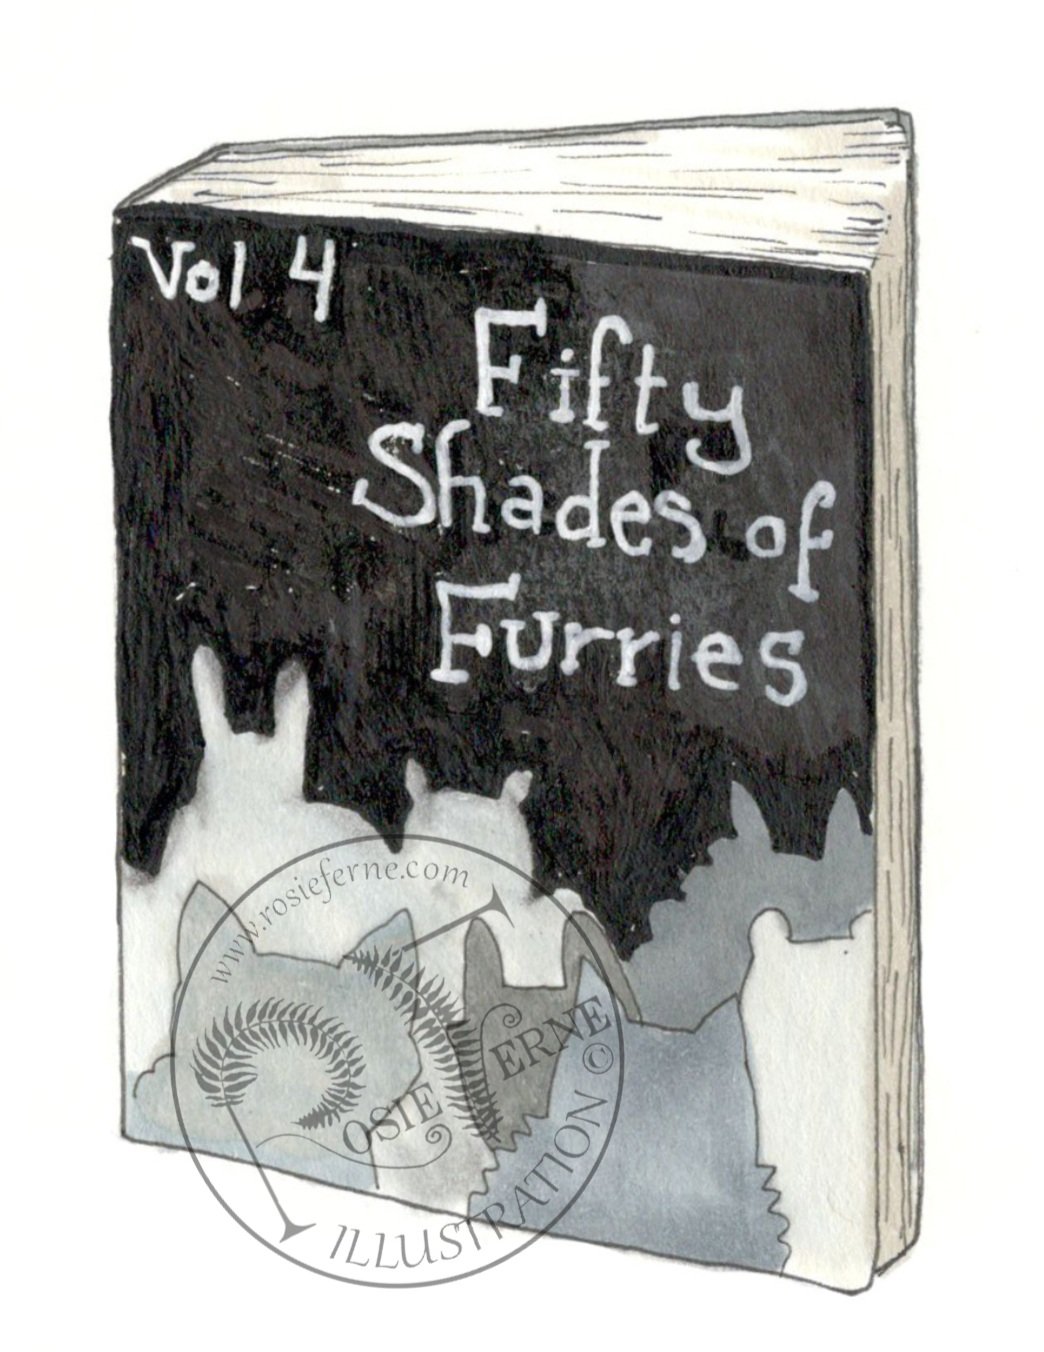 Fifty Shades of Furries: Volume 4